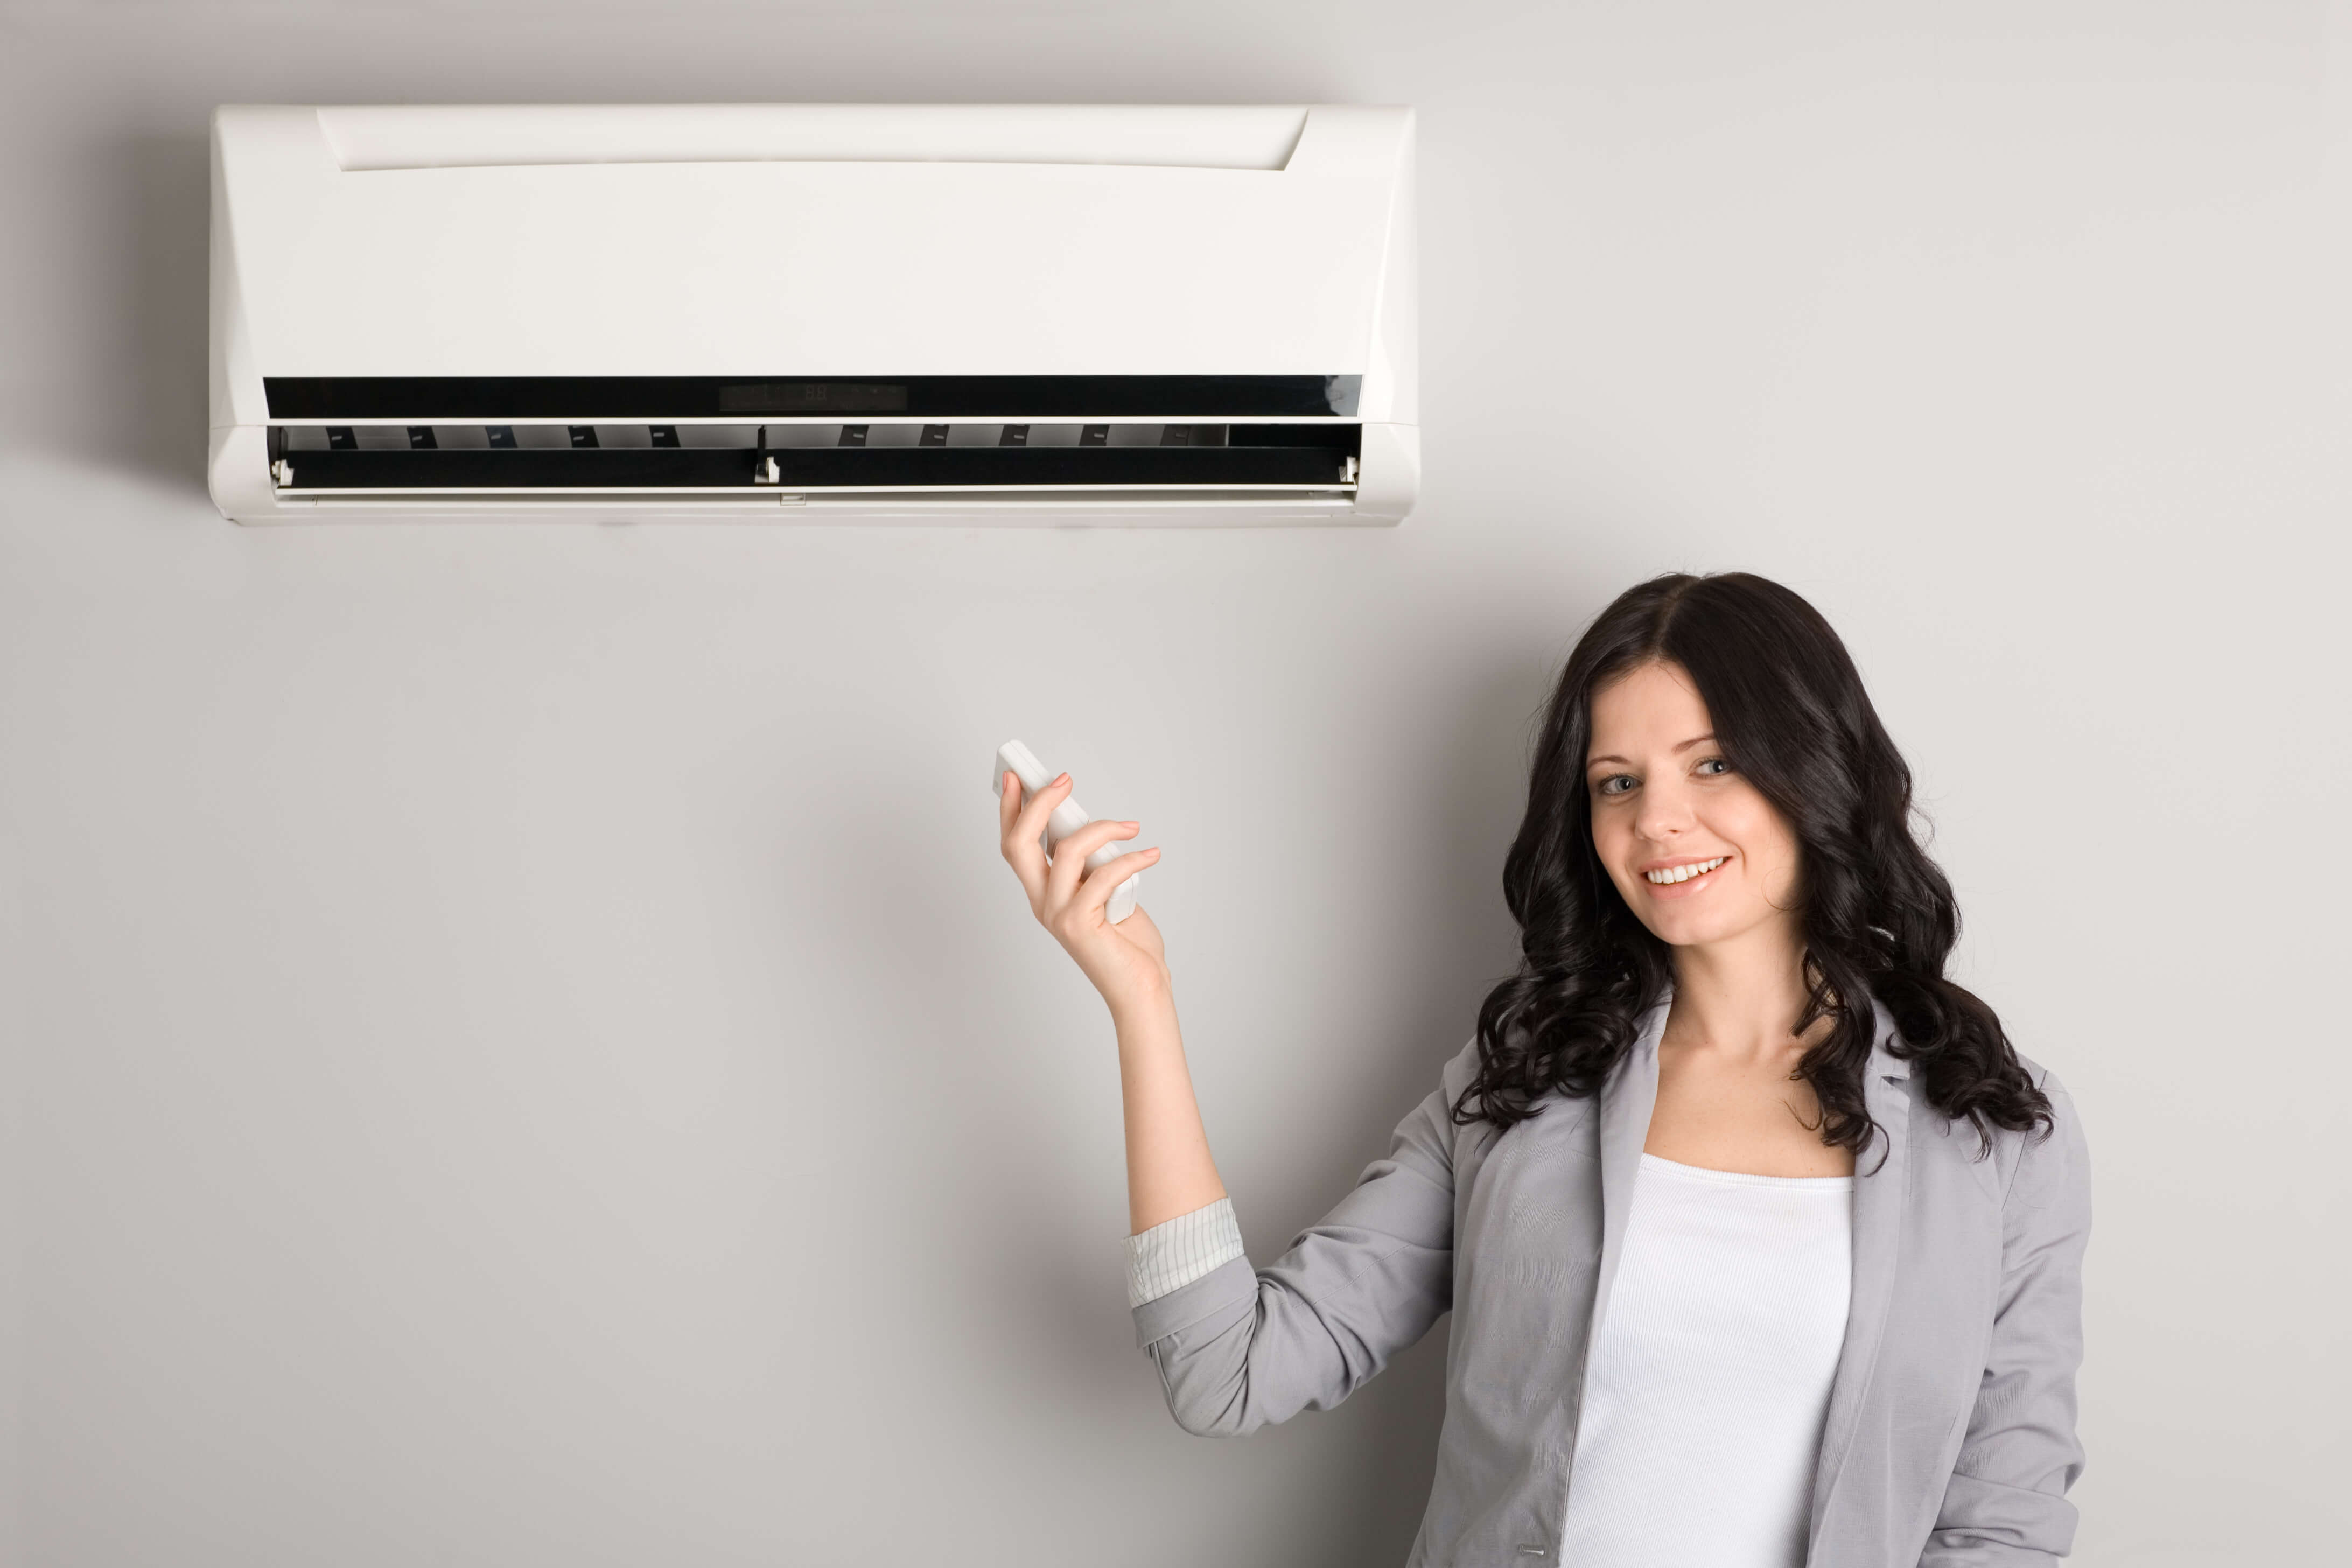 What To Do Before Turning On Air Conditioner